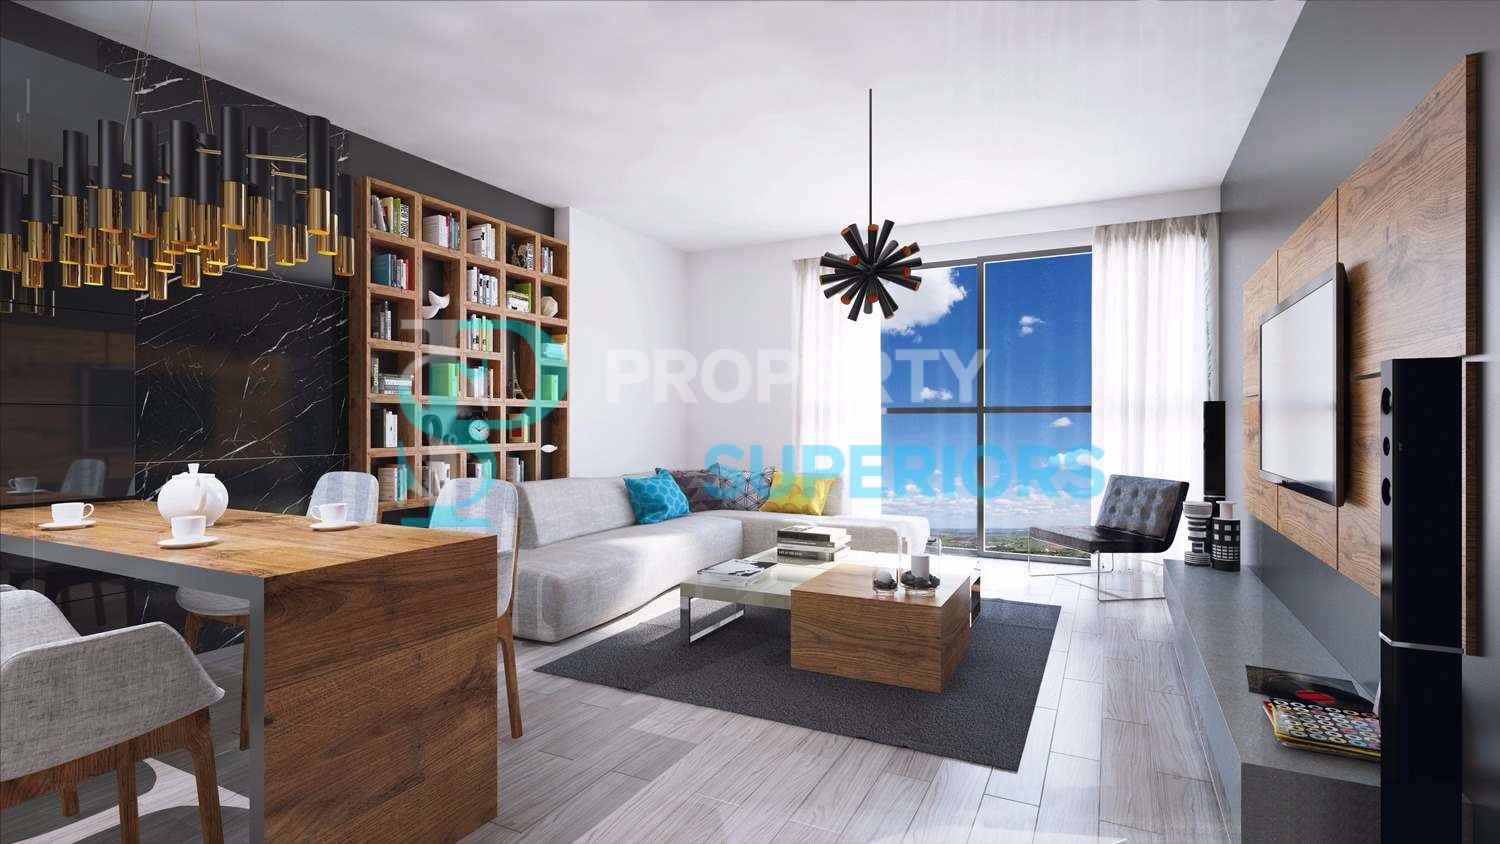 Investment Opportunity In Kadikoy With Family Concept Project